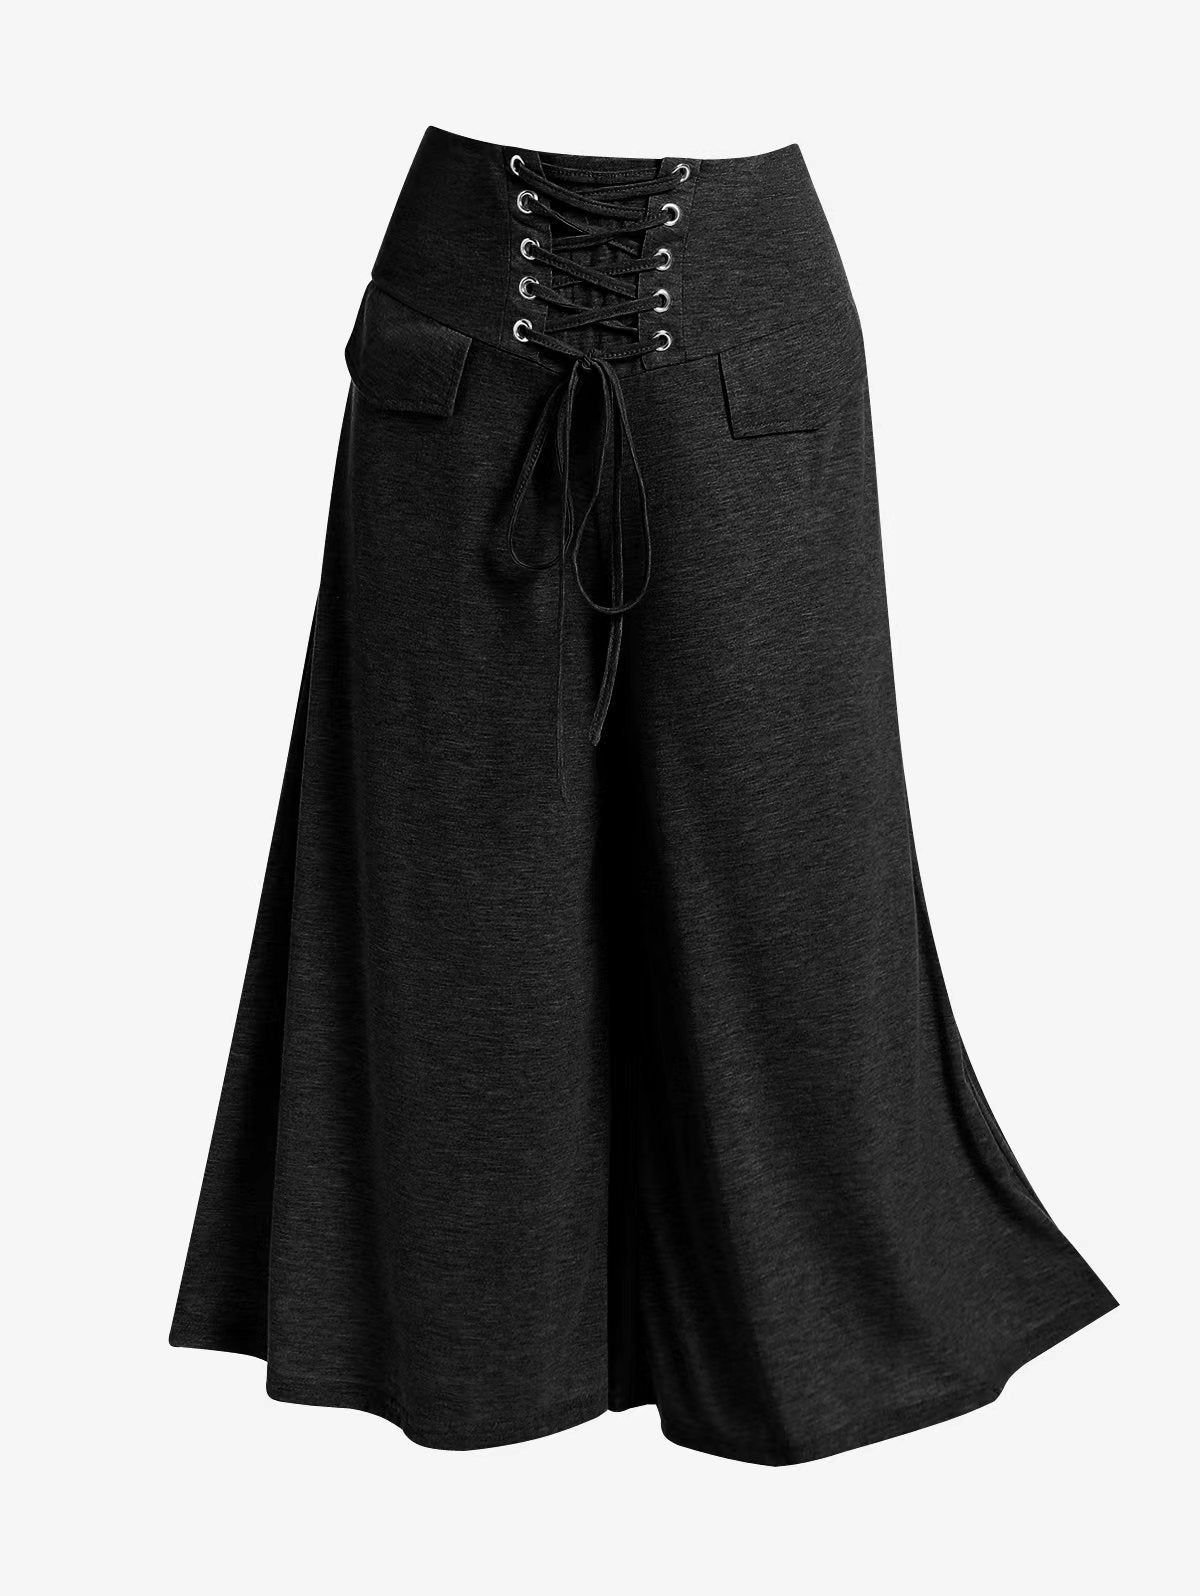 Women's Clothing High Waist With Straps Plus Size Loose Pants